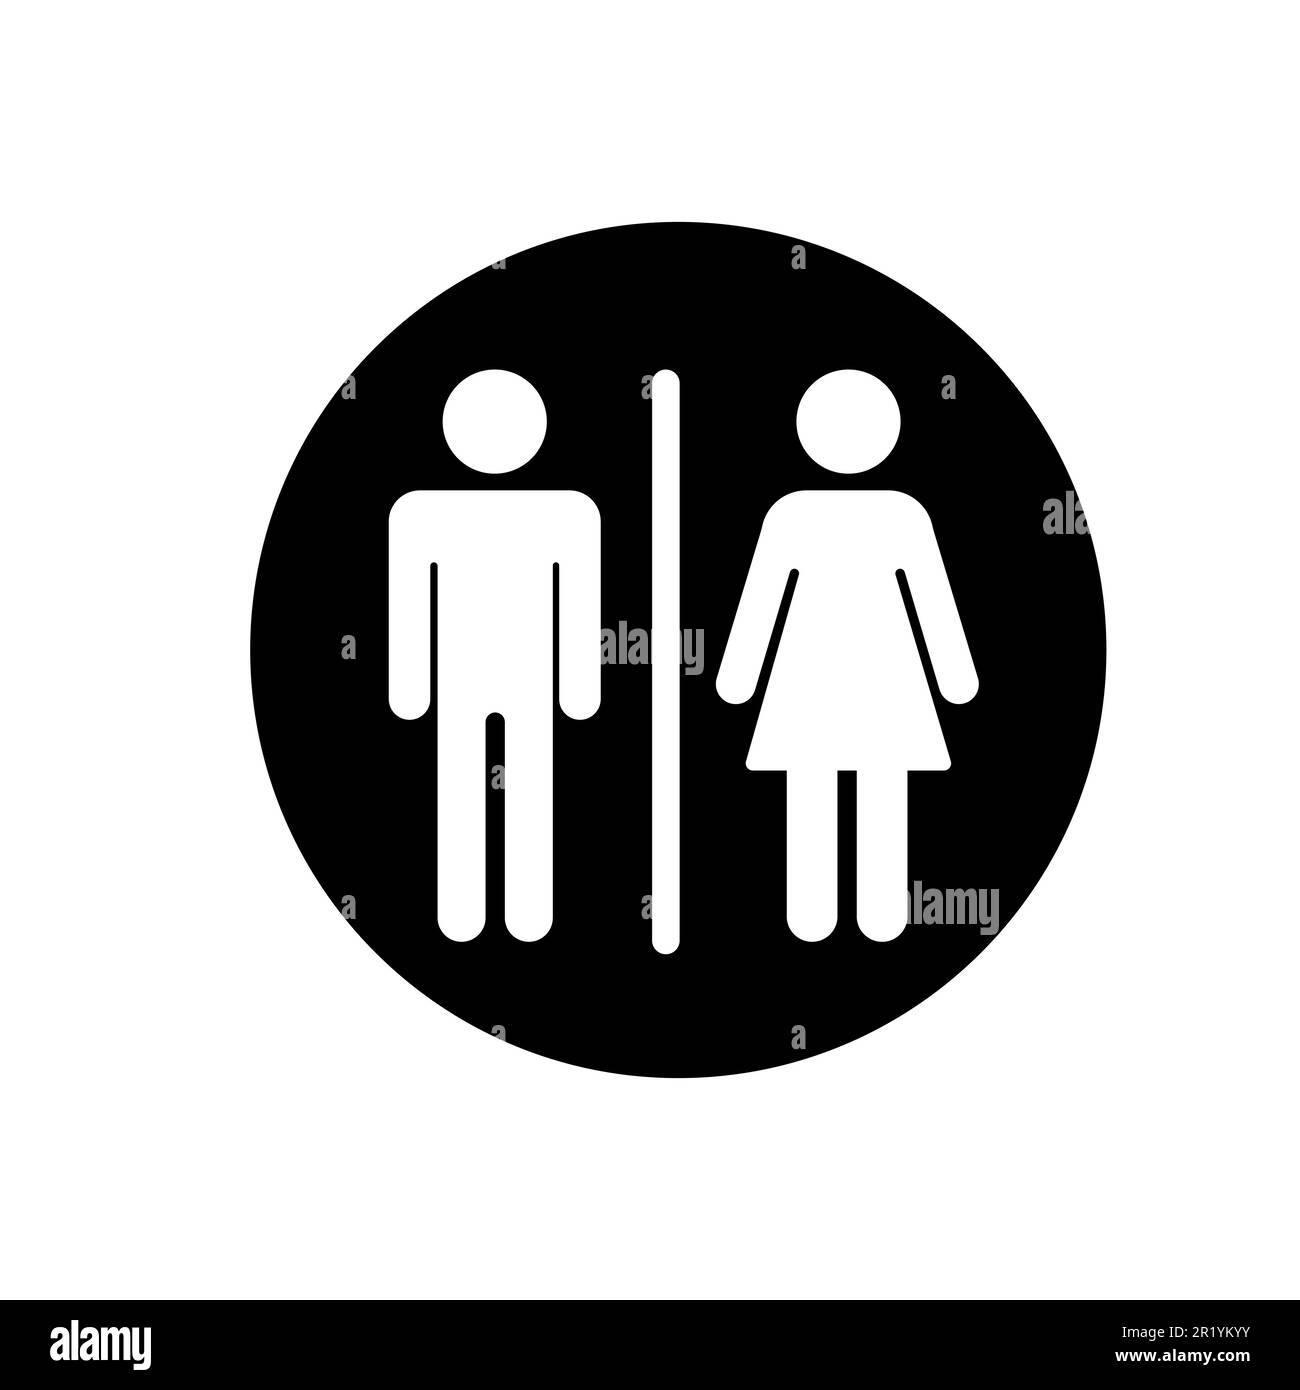 Man and woman icon. Male and female sign for restroom. Girl and boy WC pictogram for bathroom. Vector toilet symbol isolated Stock Vector